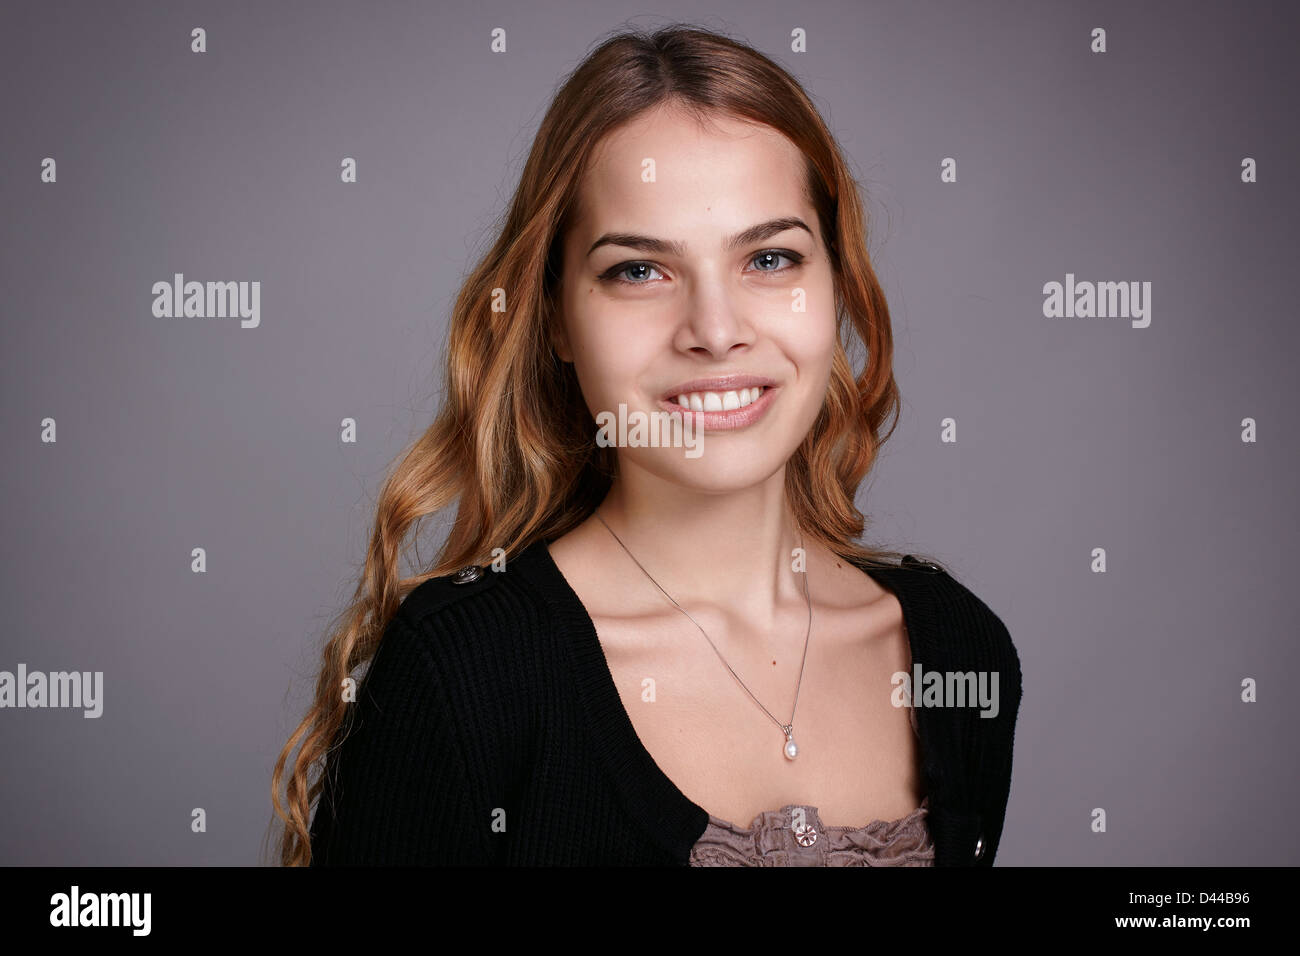 Happy young woman smiling at camera, portrait. Banque D'Images